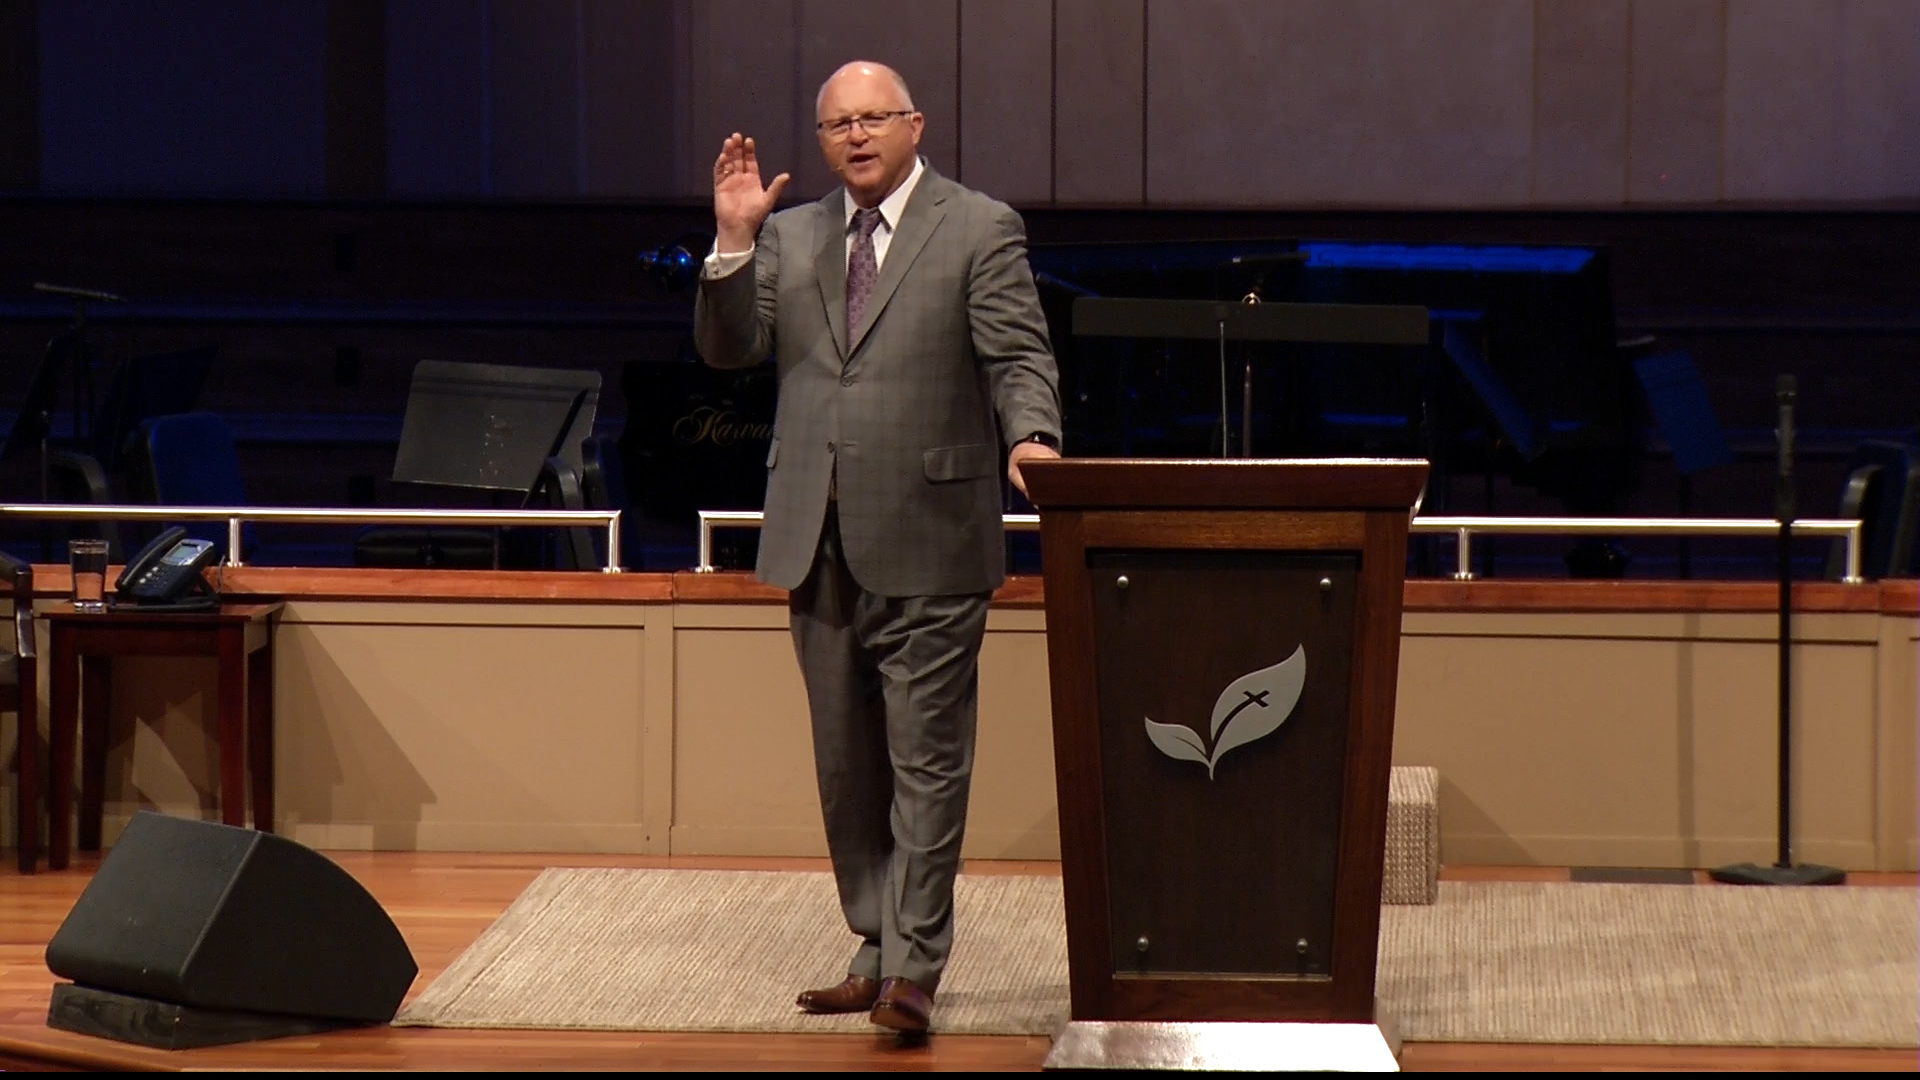 Pastor Paul Chappell: Making the Most of Ministry